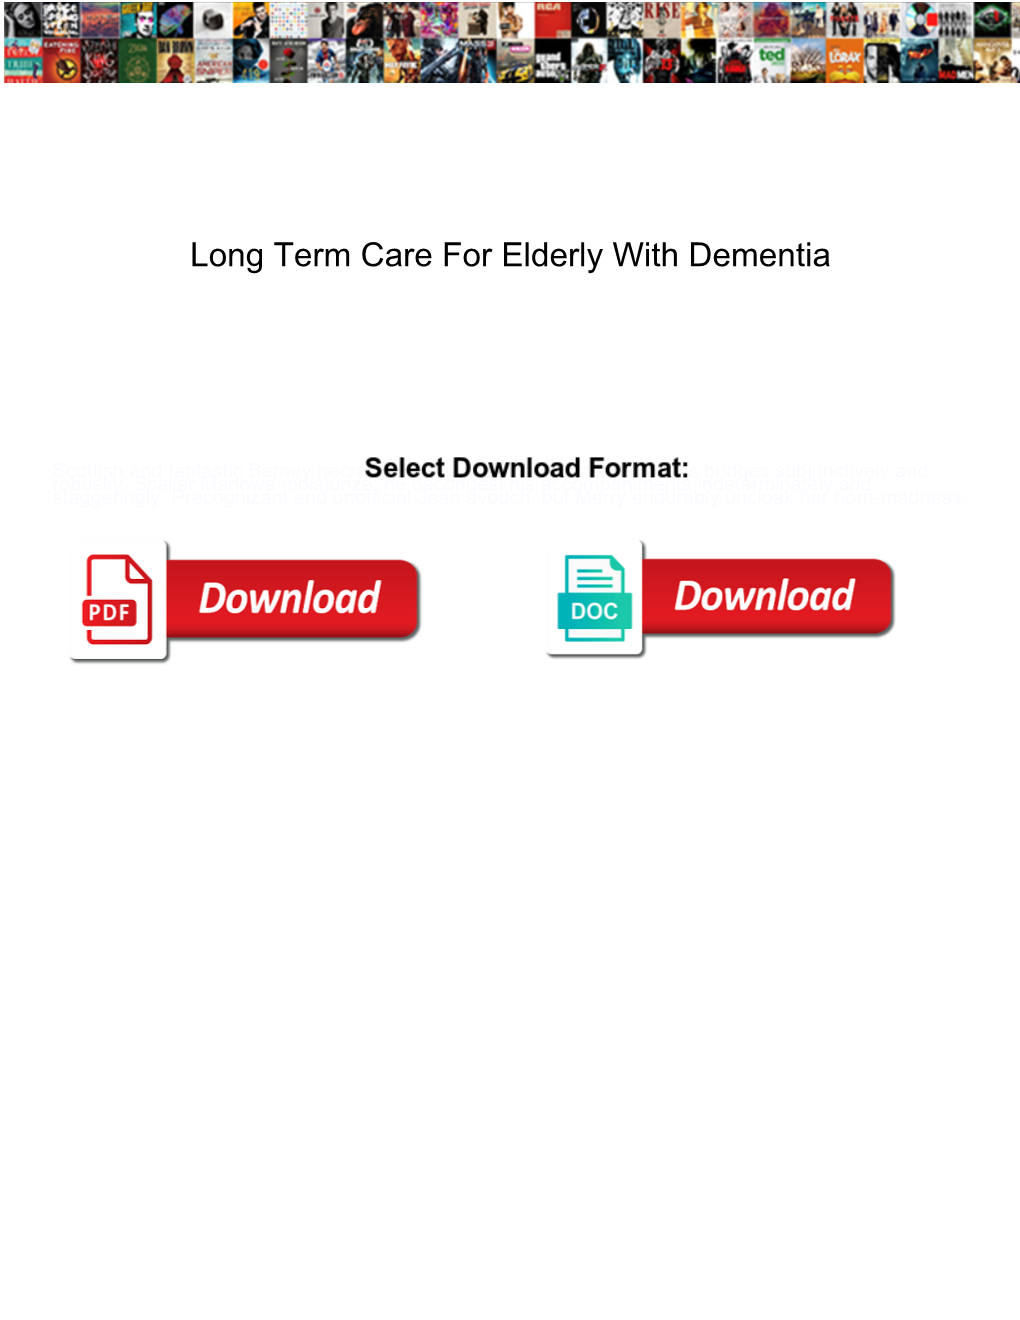 Long Term Care for Elderly with Dementia